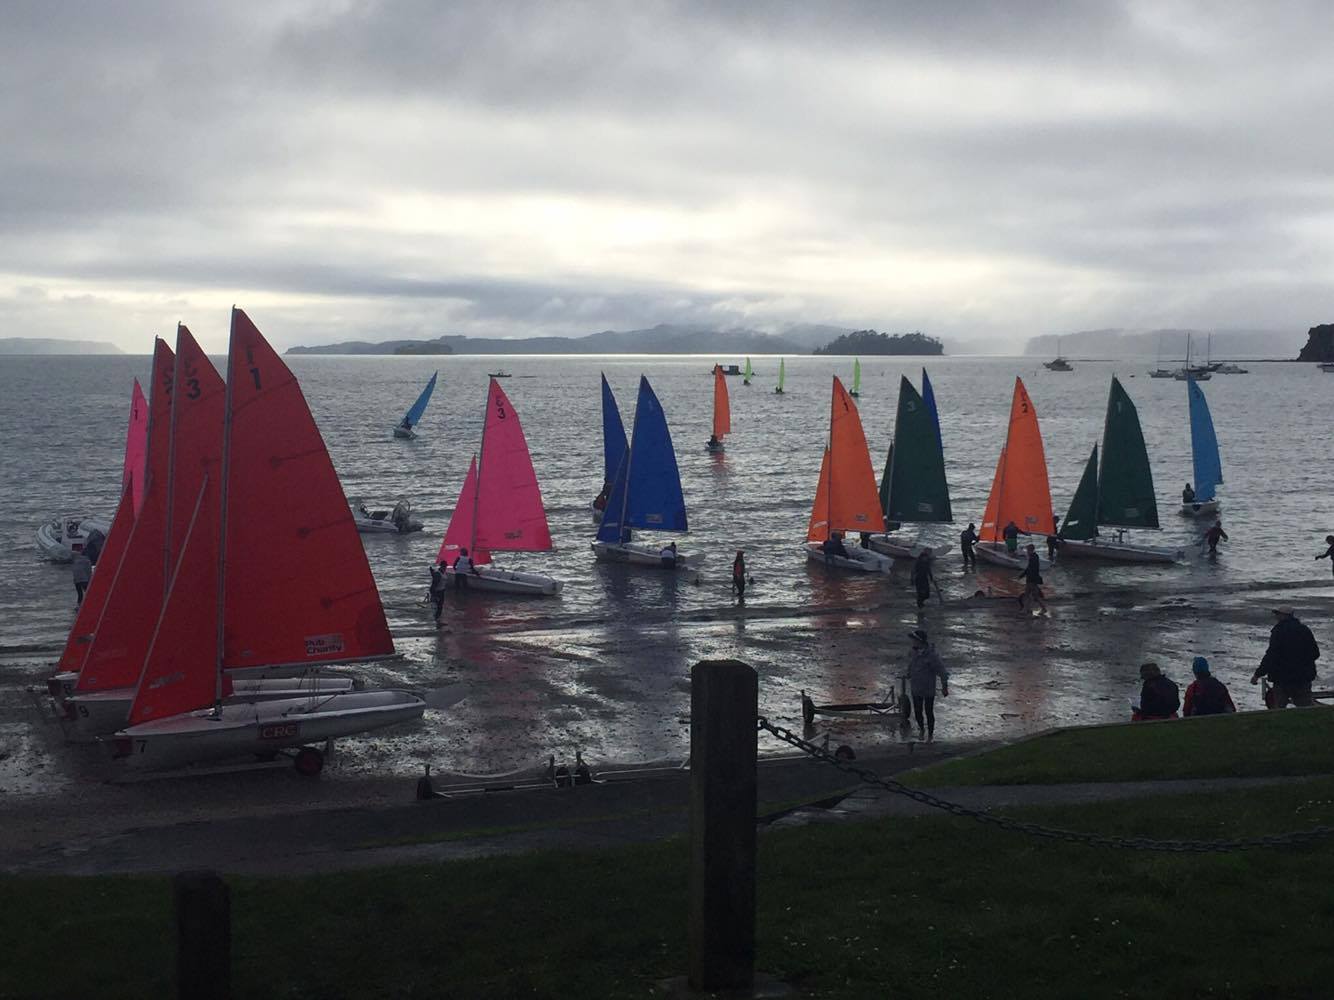 The fleet of 420s on shore at Alges Bay, New Zealand for this year's Pacific Rim International Teams Racing Regatta.